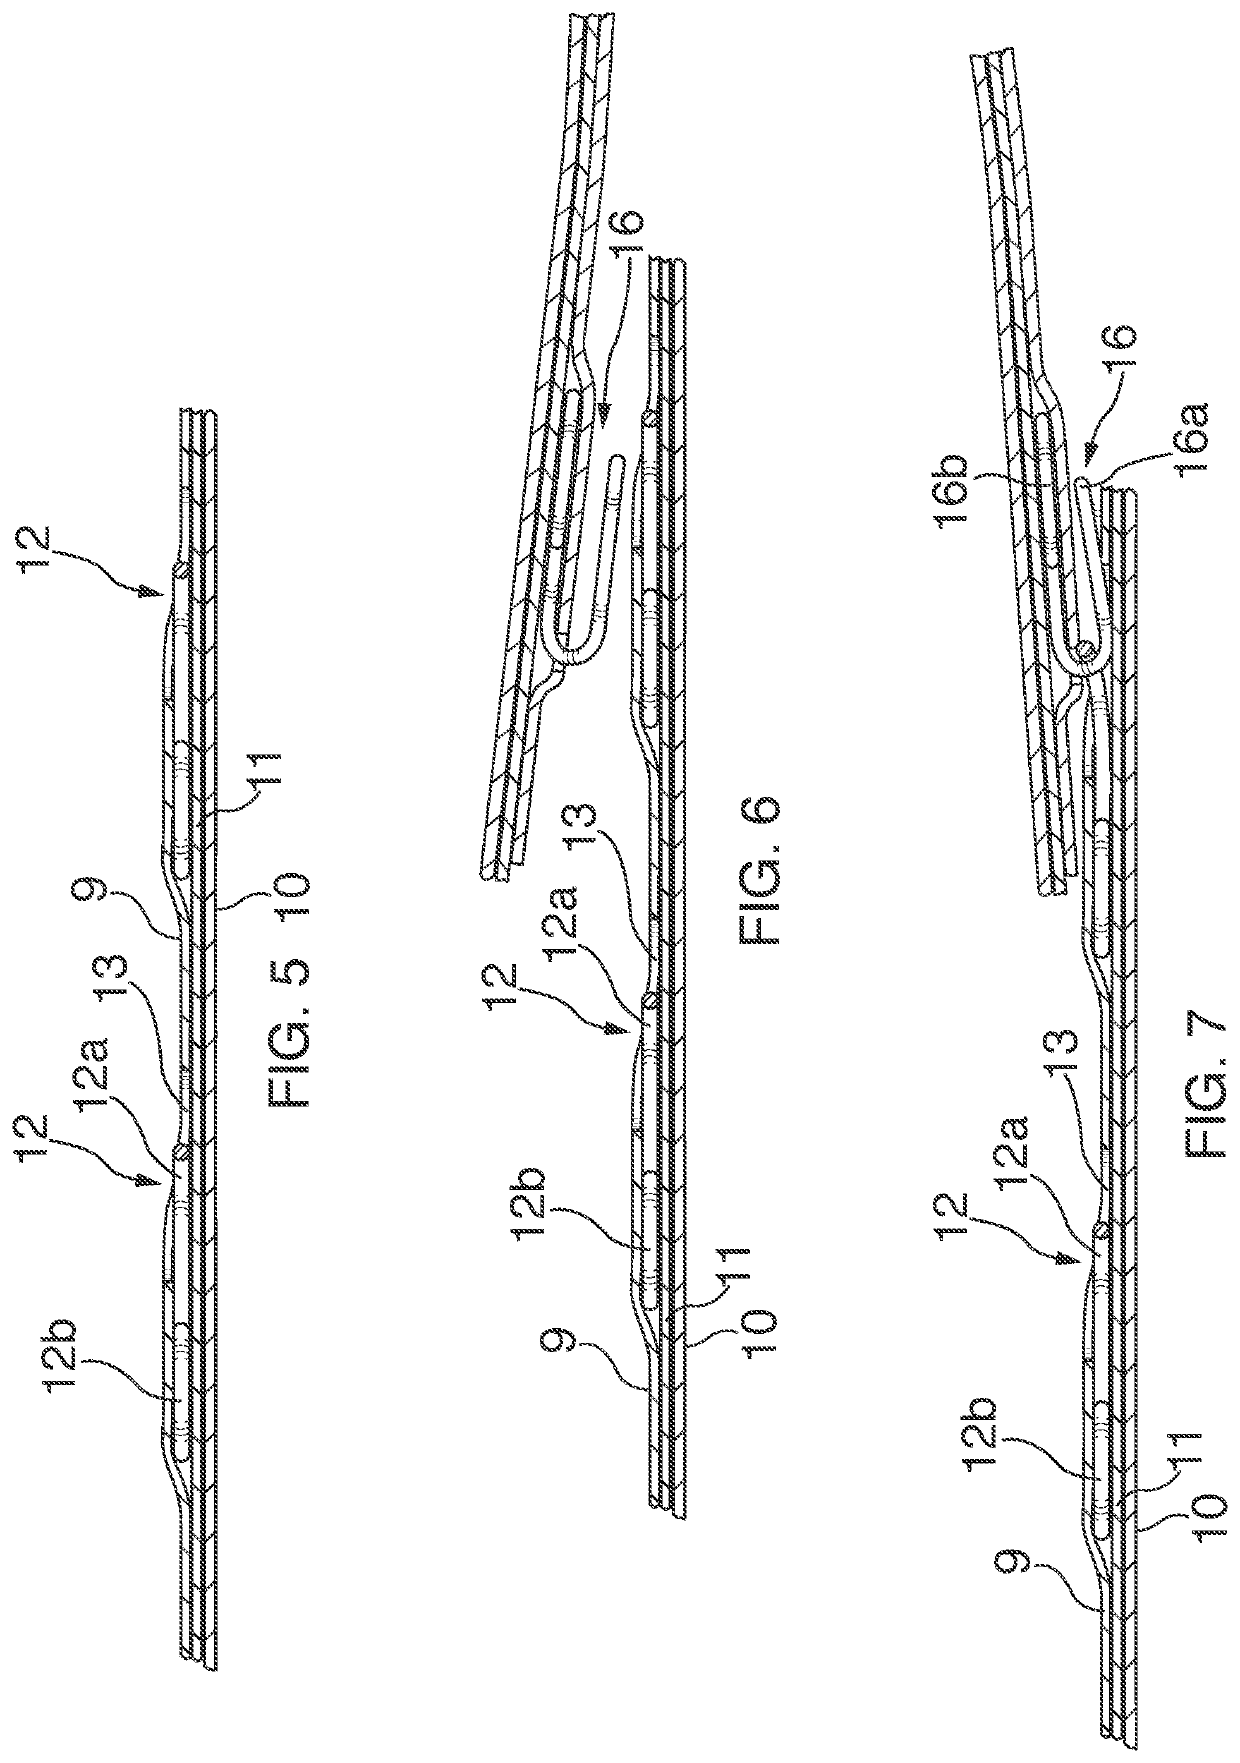 Fastening system and method of manufacturing thereof